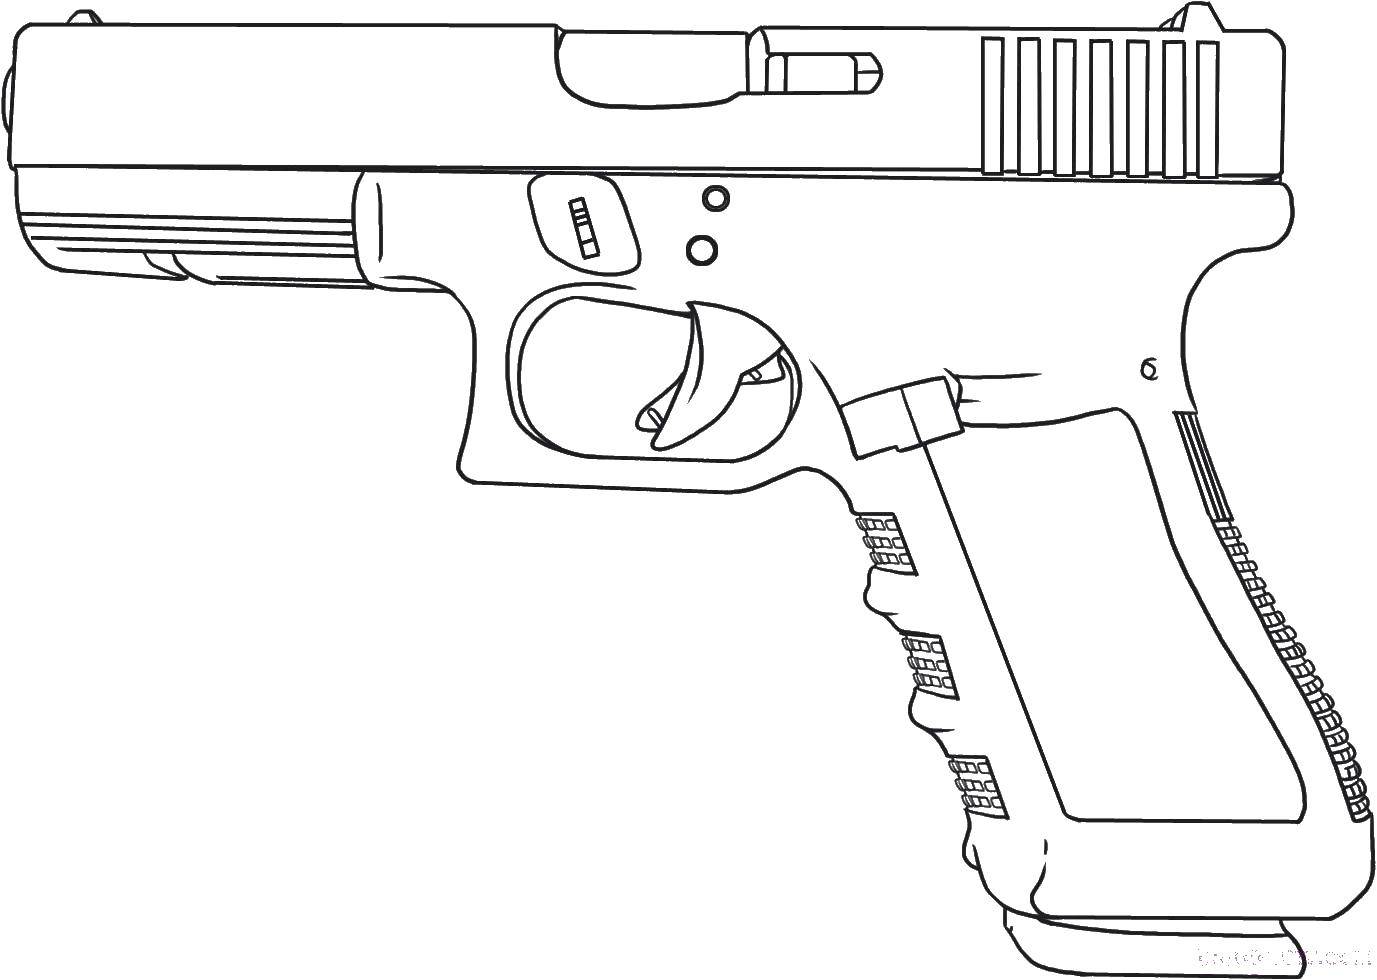 Coloring Gun. Category weapons. Tags:  weapons, gun.